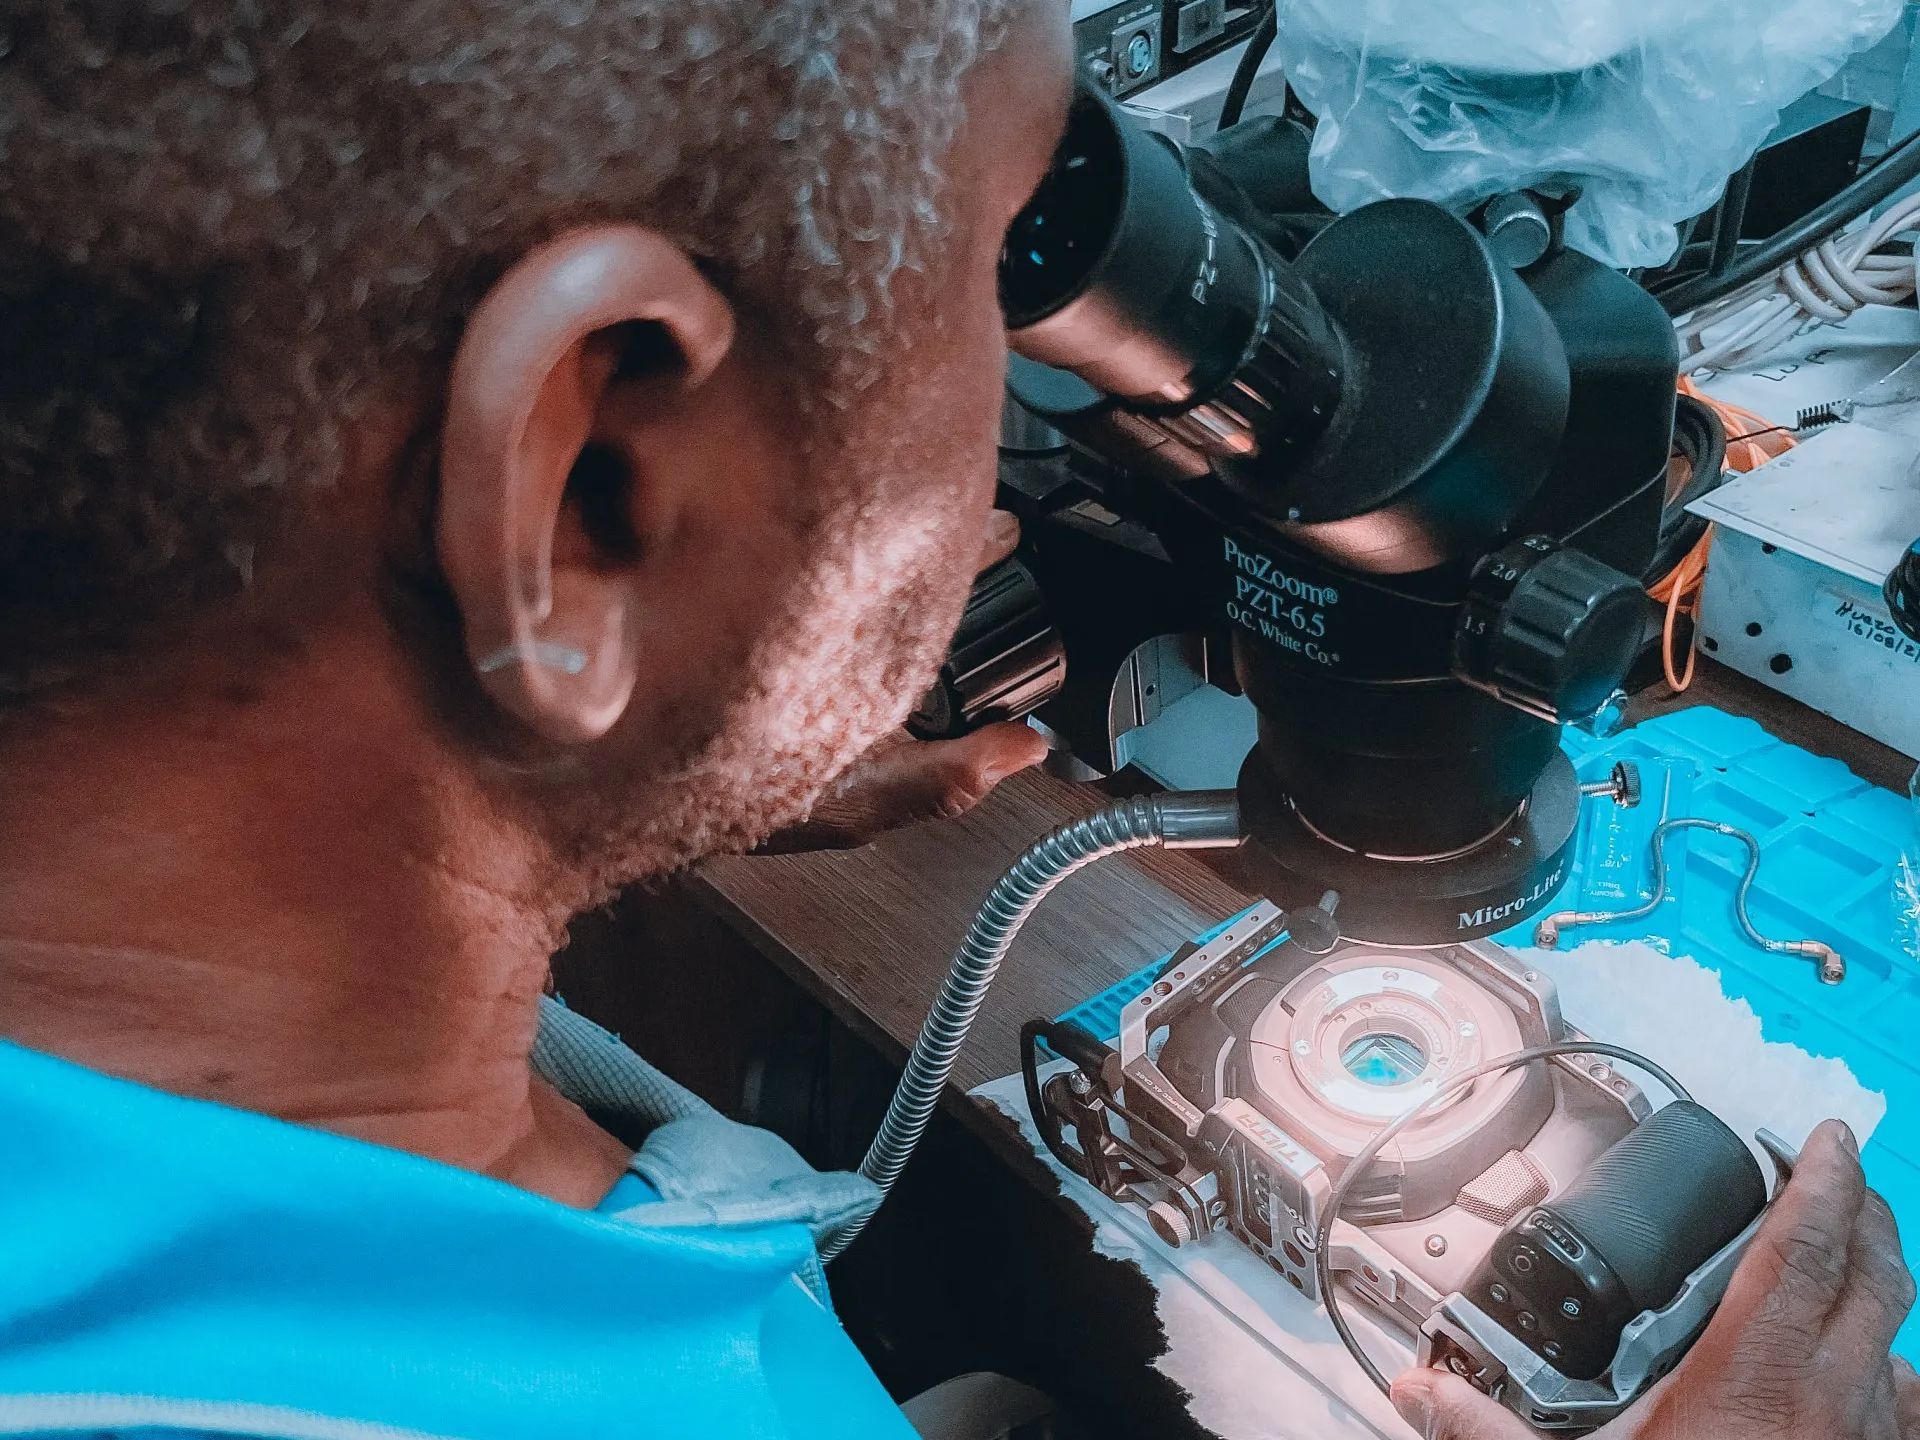 a man is working on a camera under a microscope .